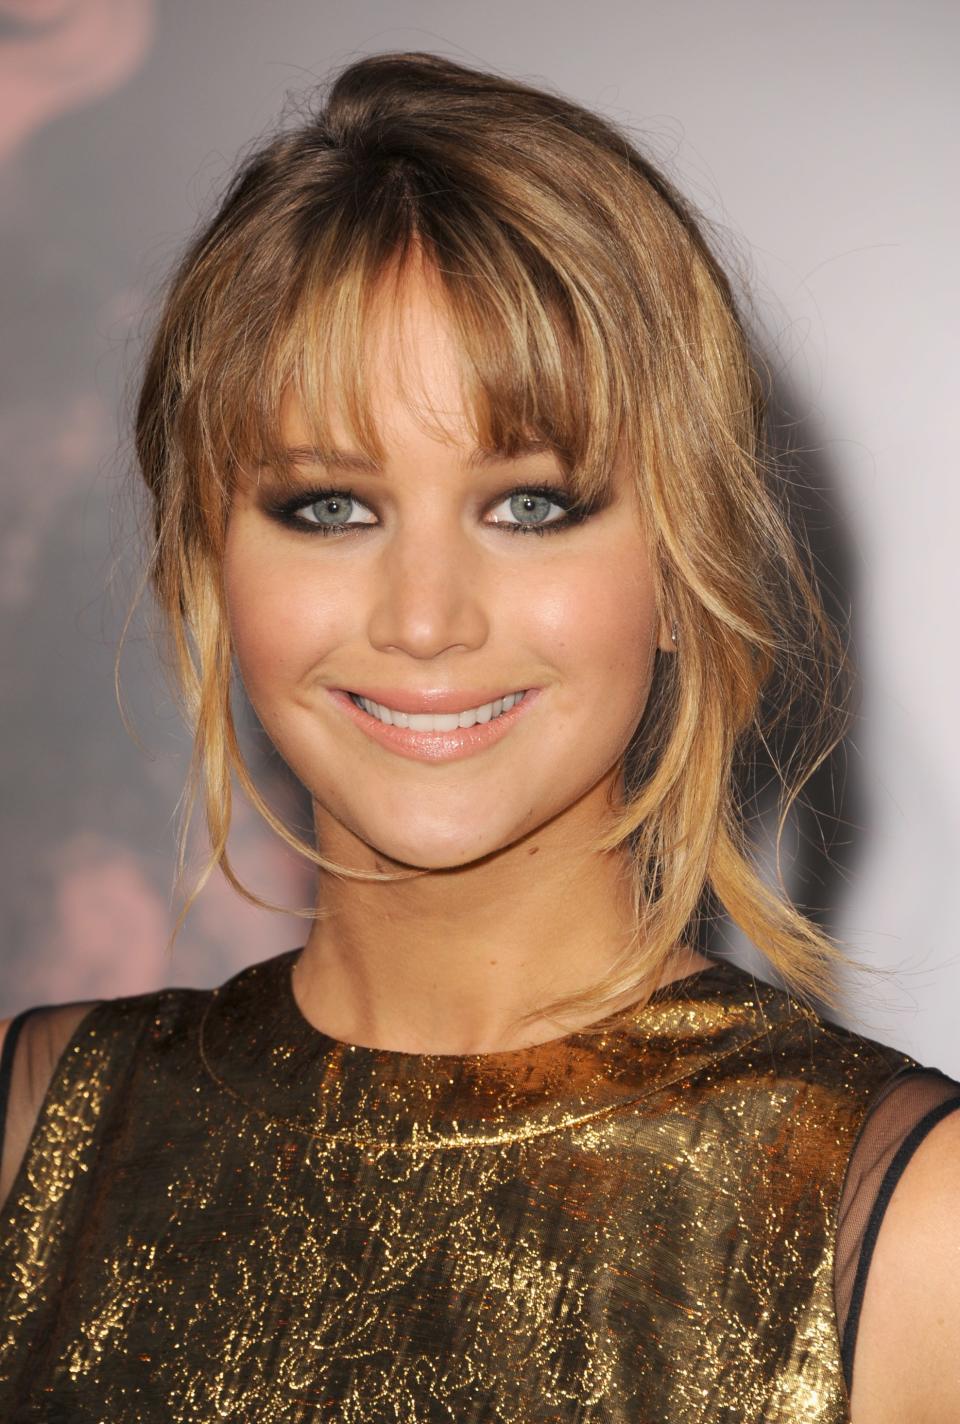 At the L.A. premiere of The Hunger Games in 2012